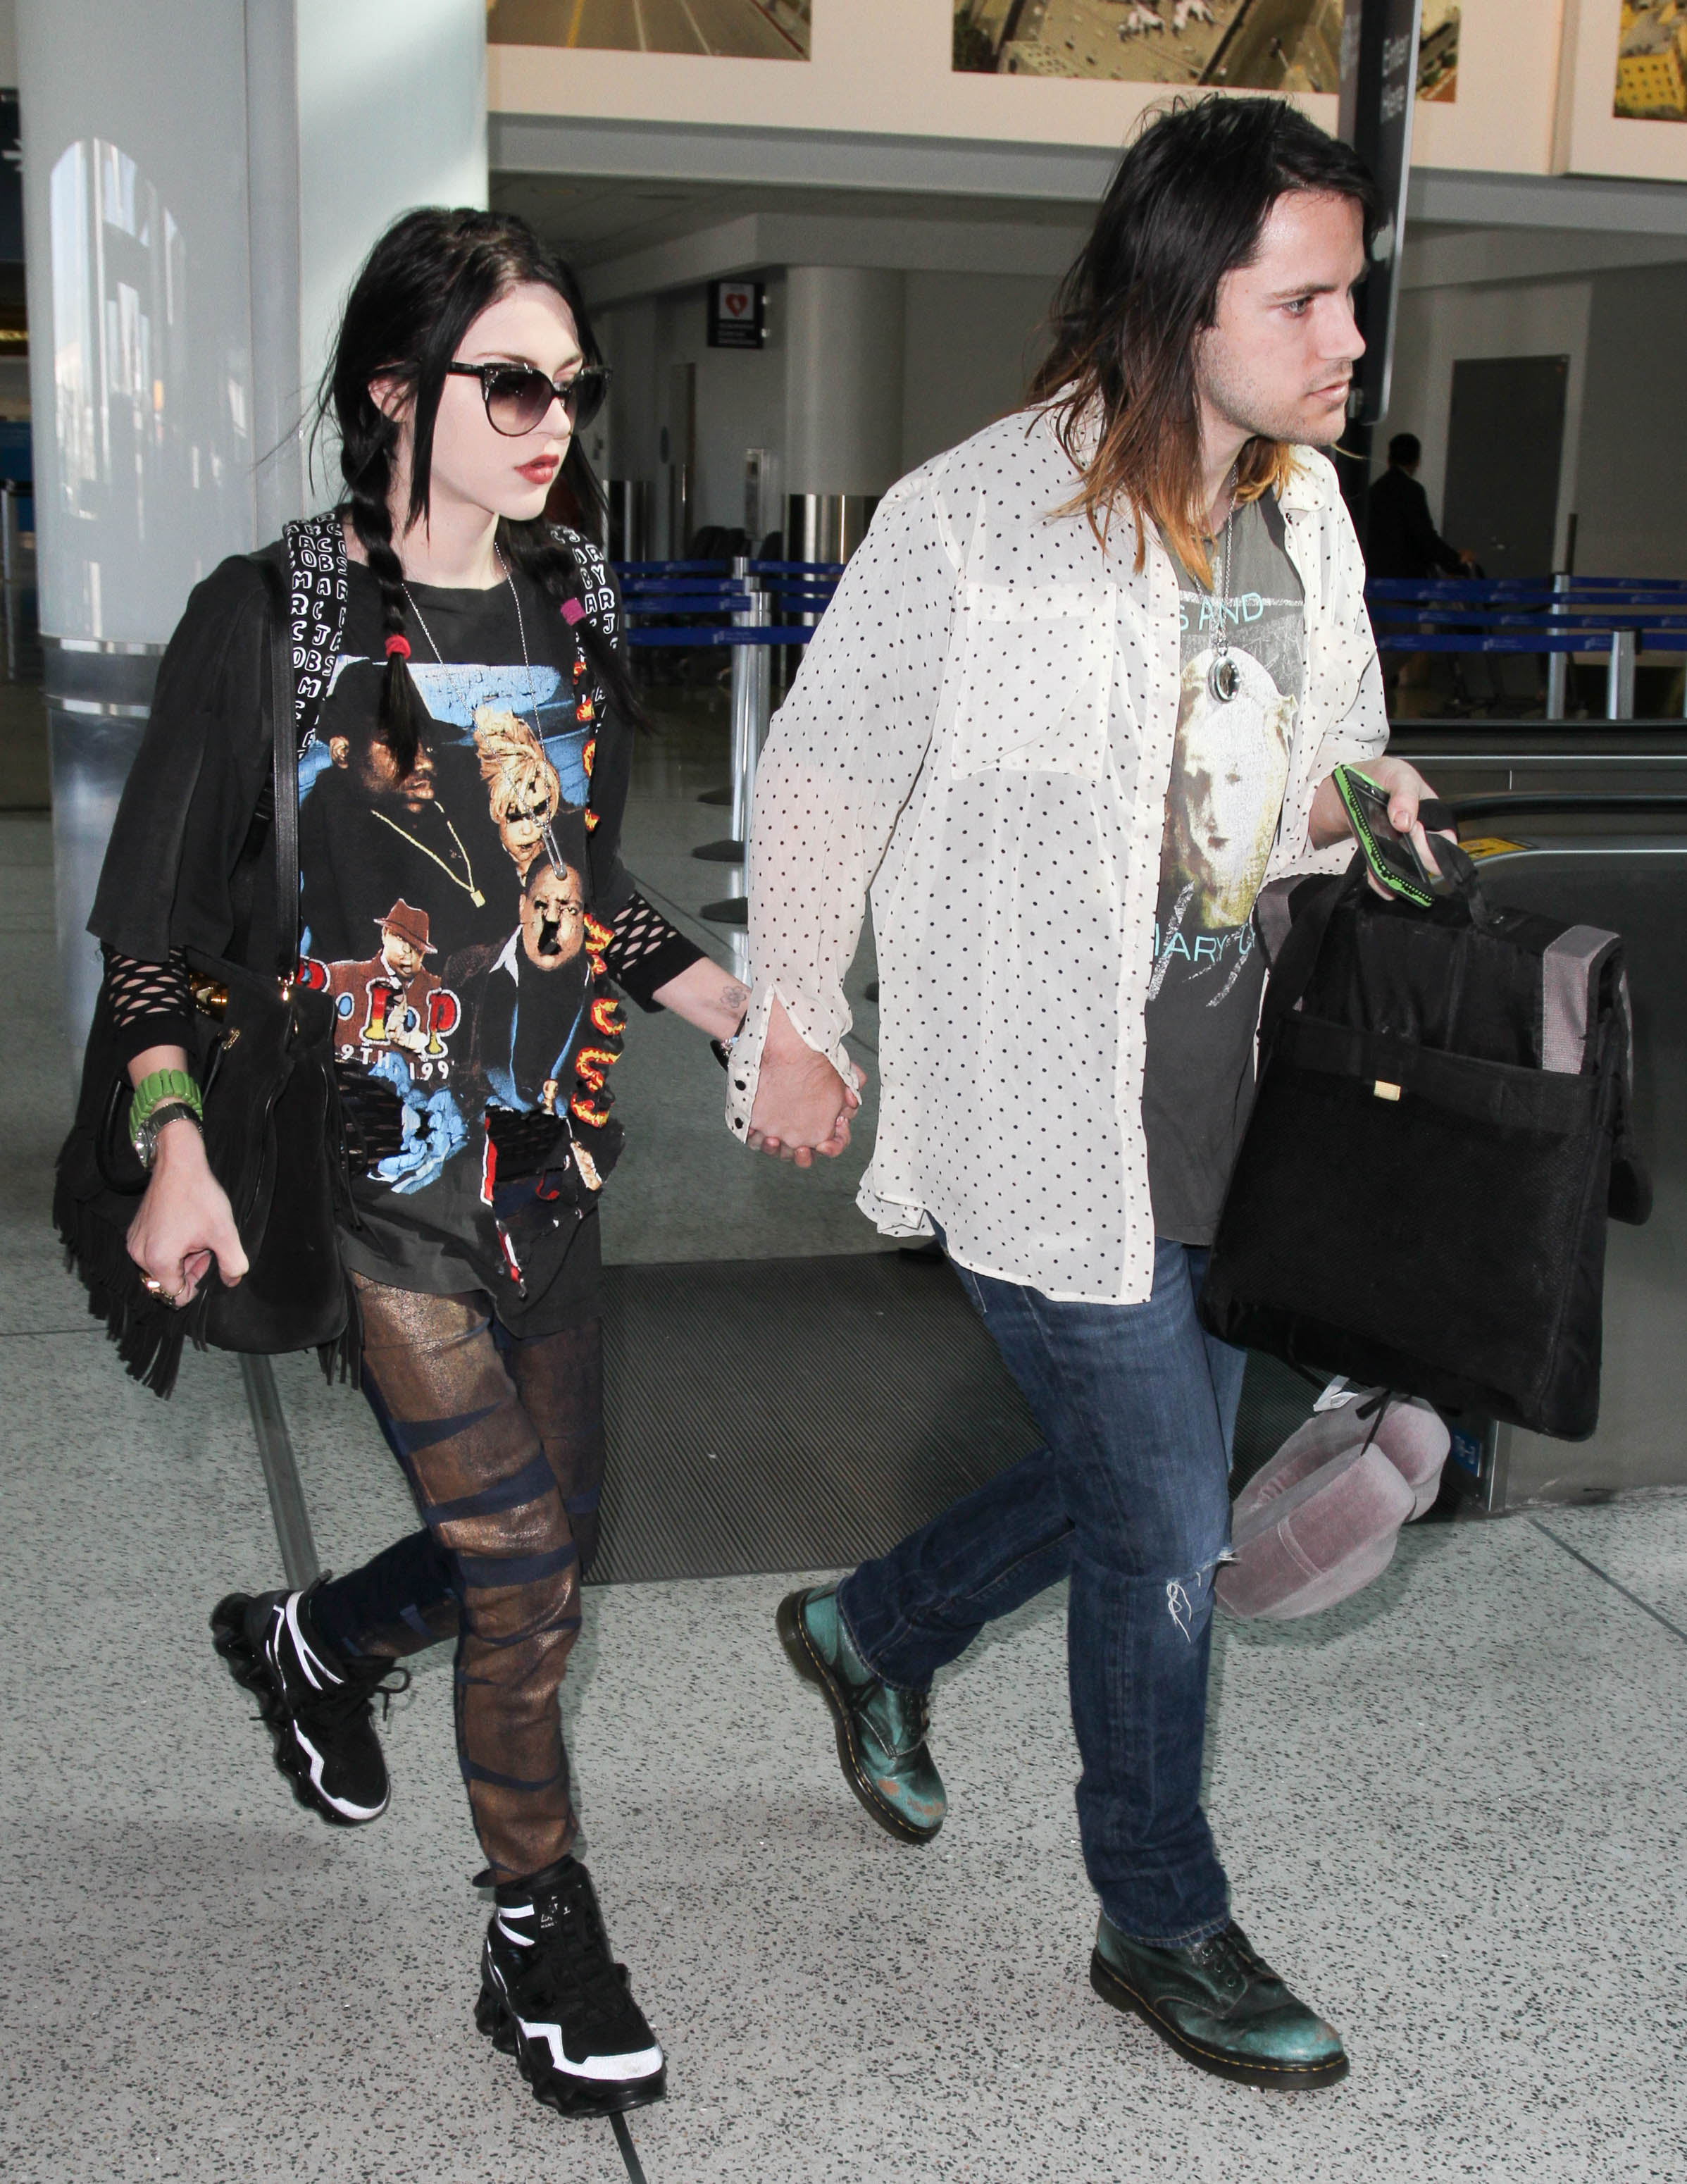 Frances Cobain and Isaiah Silva in LAX on January 23, 2015 in Los Angeles, California. | Source: Getty Images